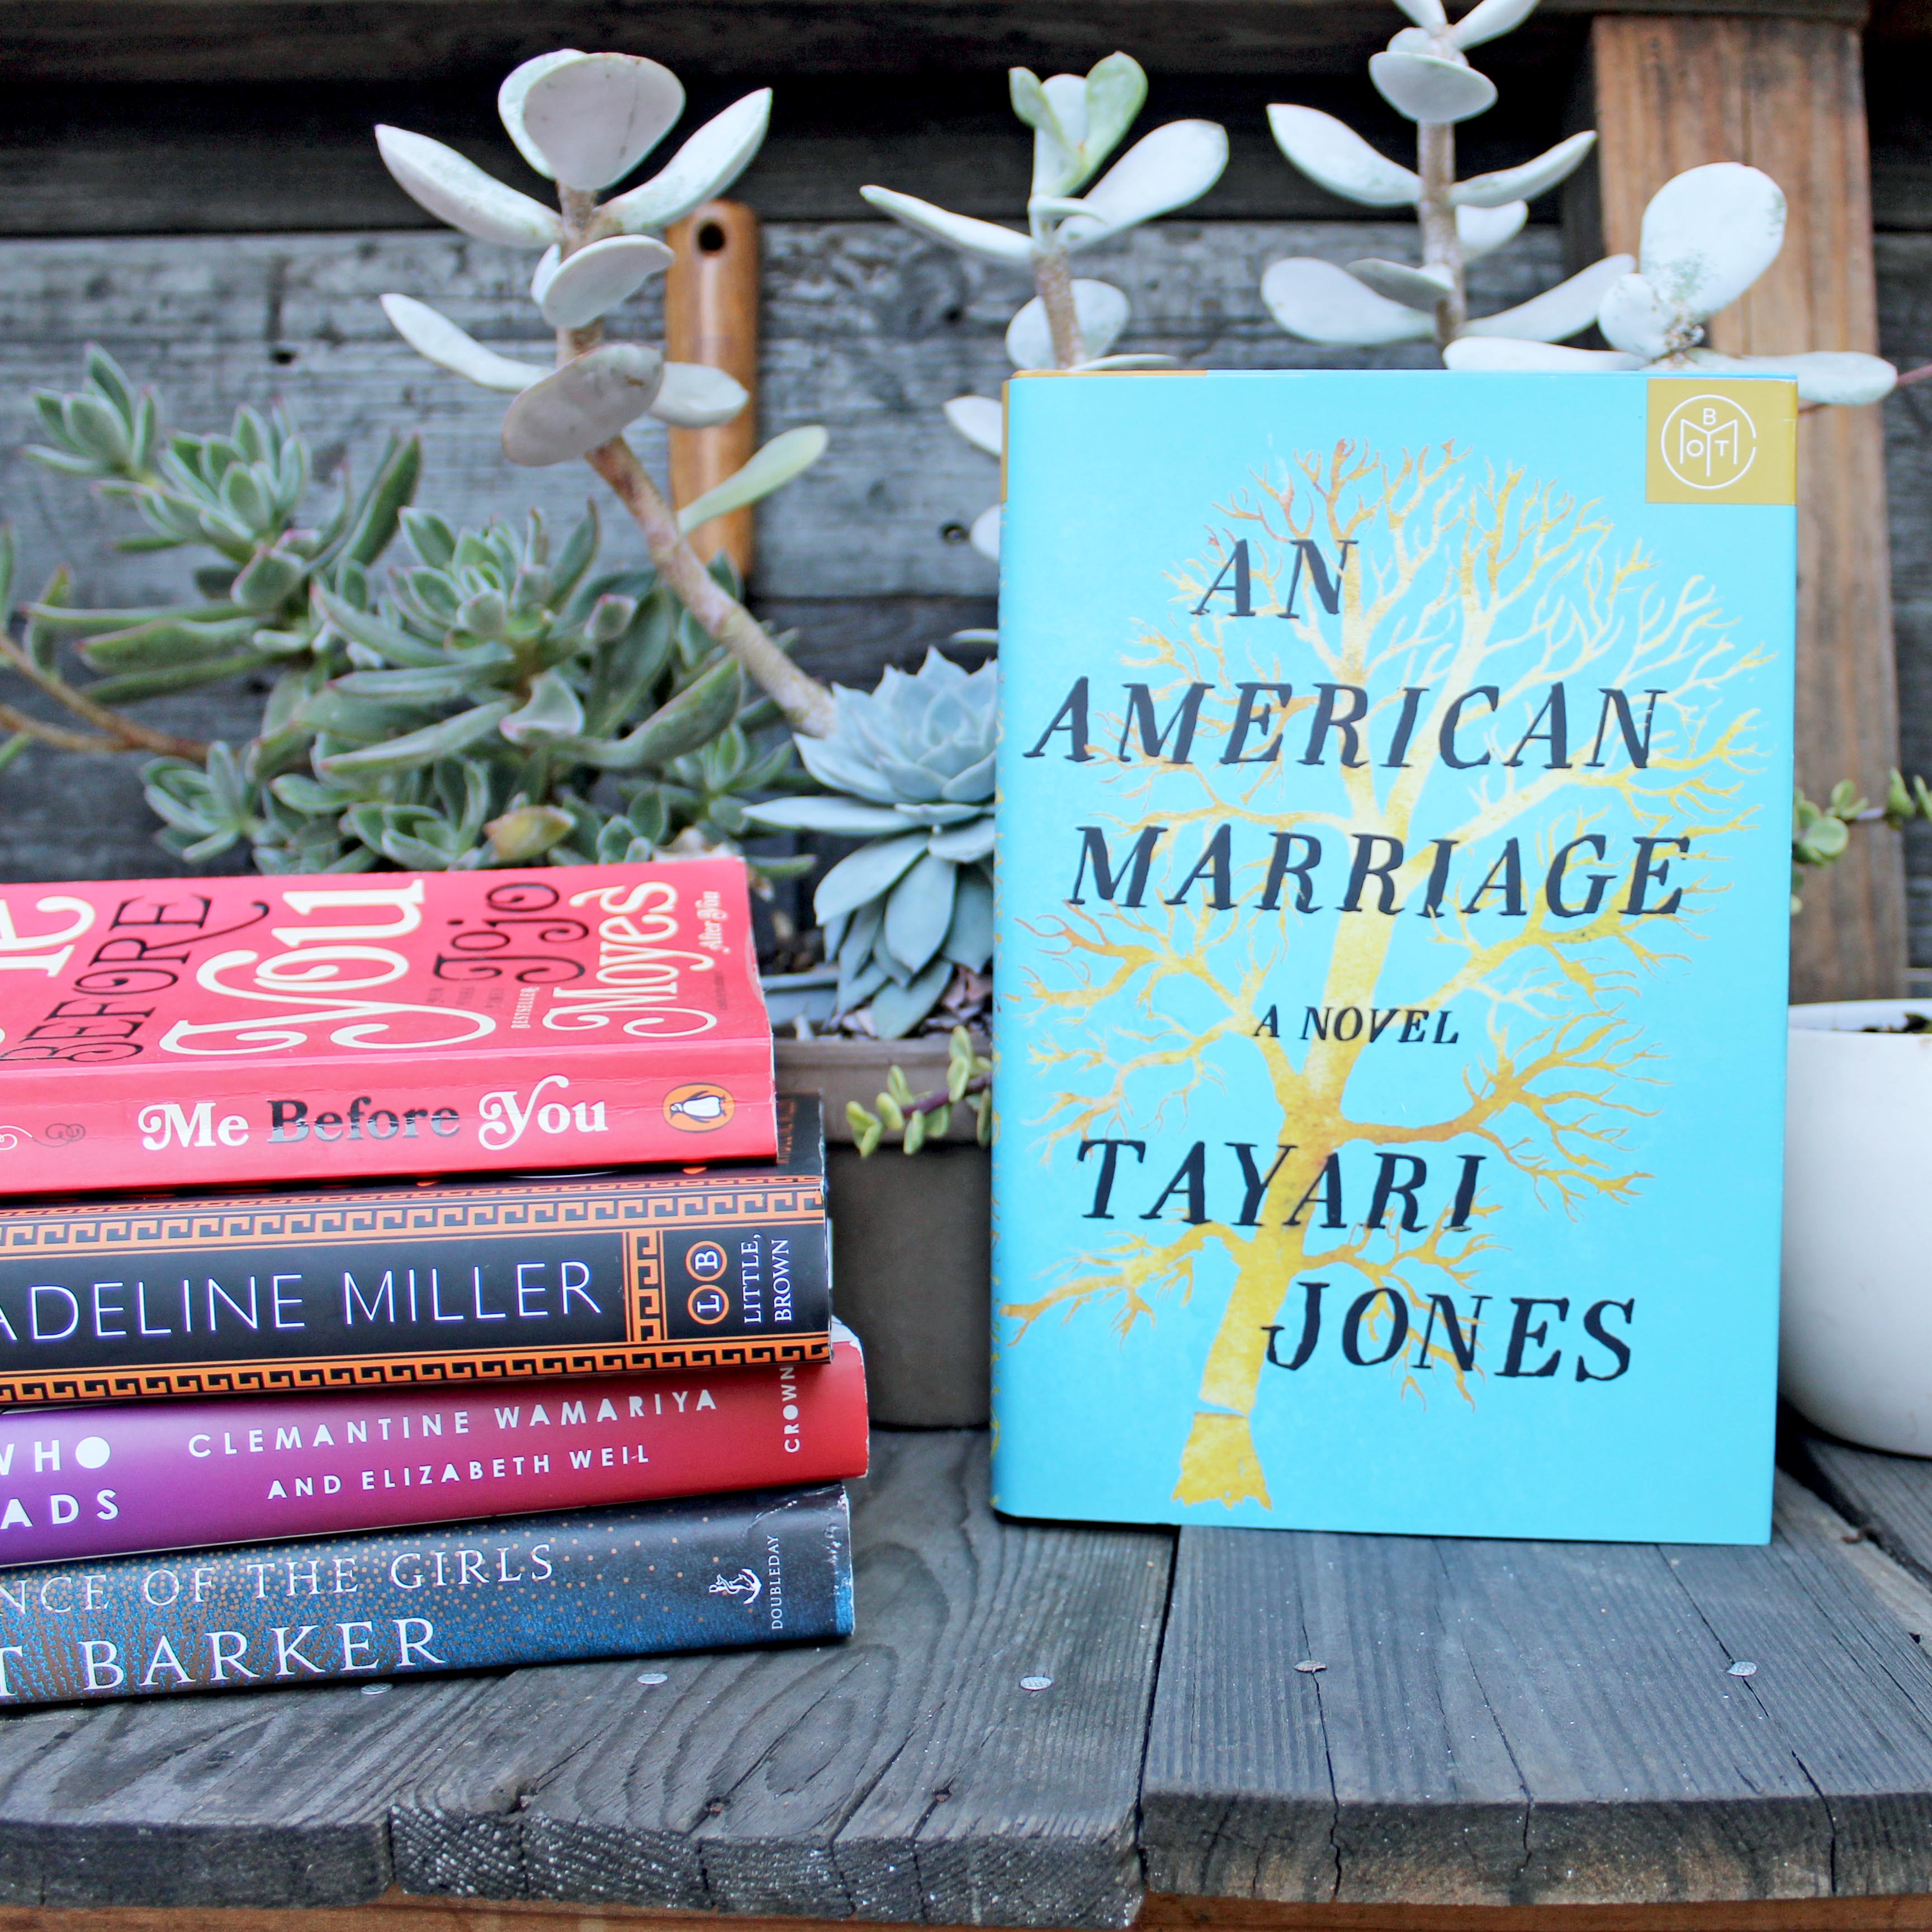 5 Favorite Sewing Projects & Reads "An American Marriage"